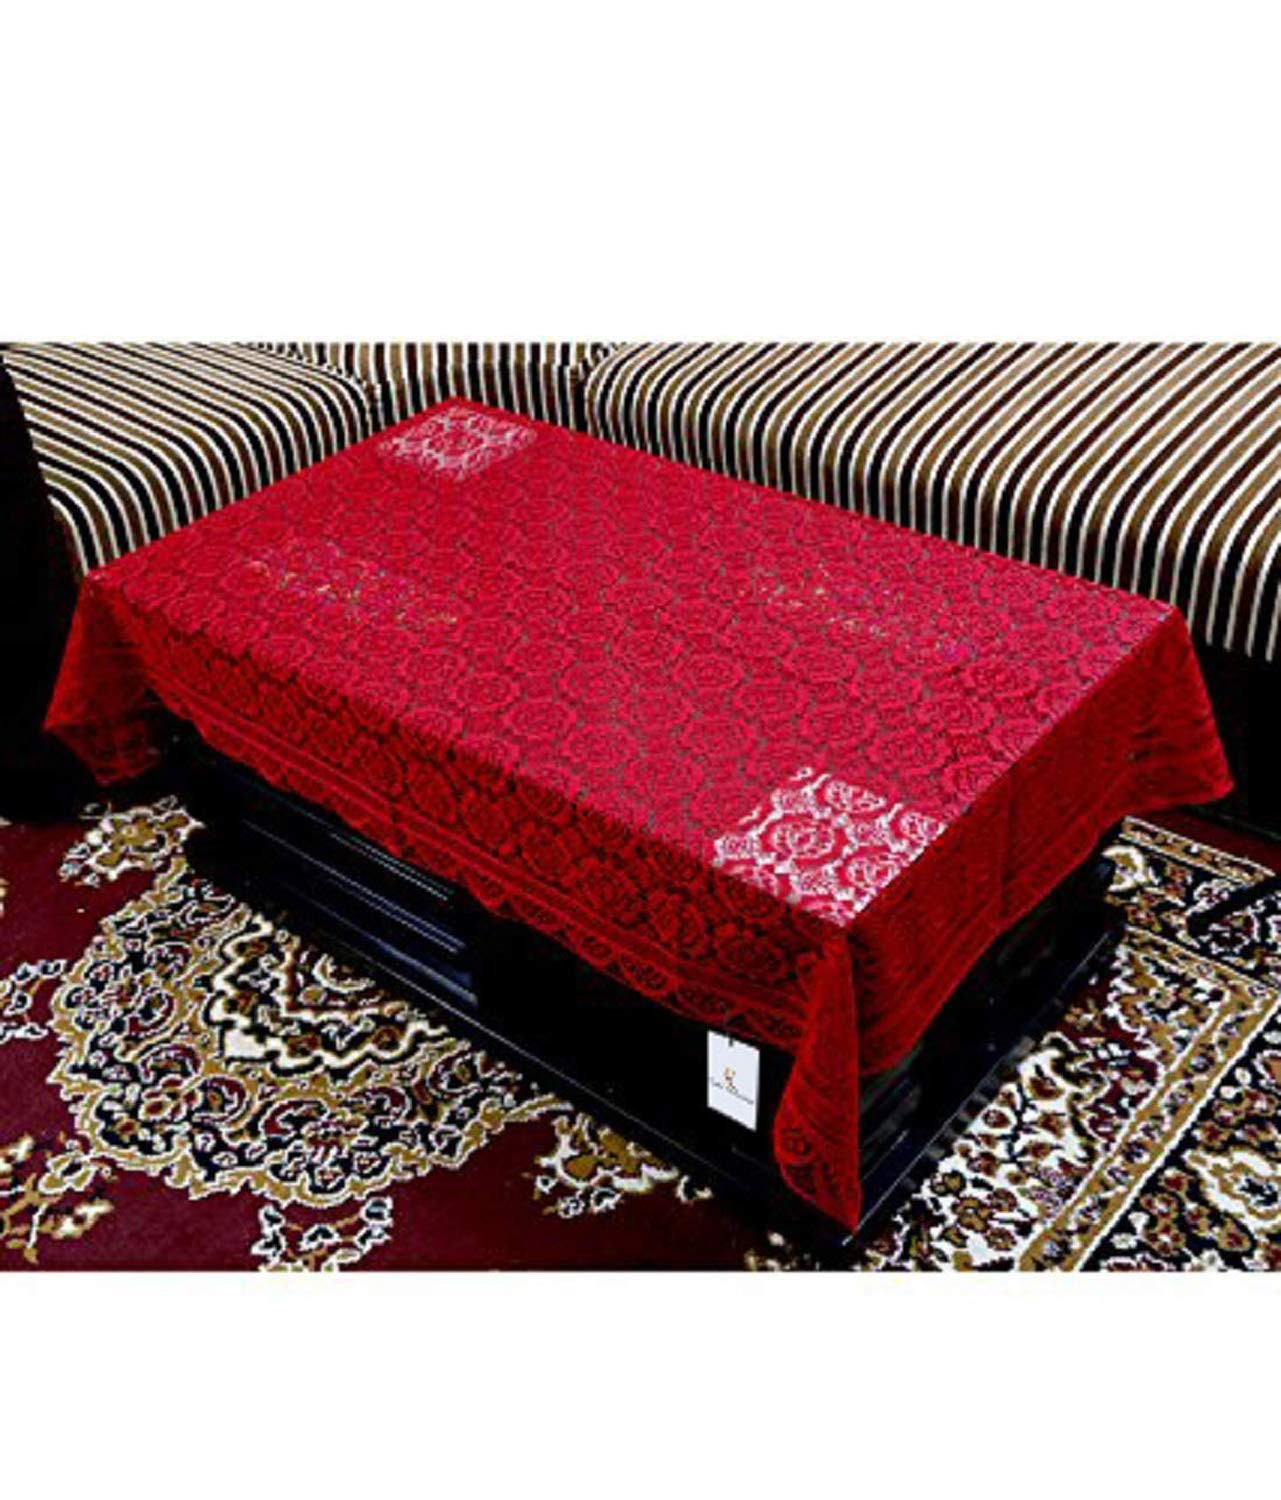 Kuber Industries Square Design Cotton 5 Seater Sofa Cover Set with 6 Pieces Arms cover And 1 Center Table Cover (Set Of 17,Maroon )-KUBMRT12004